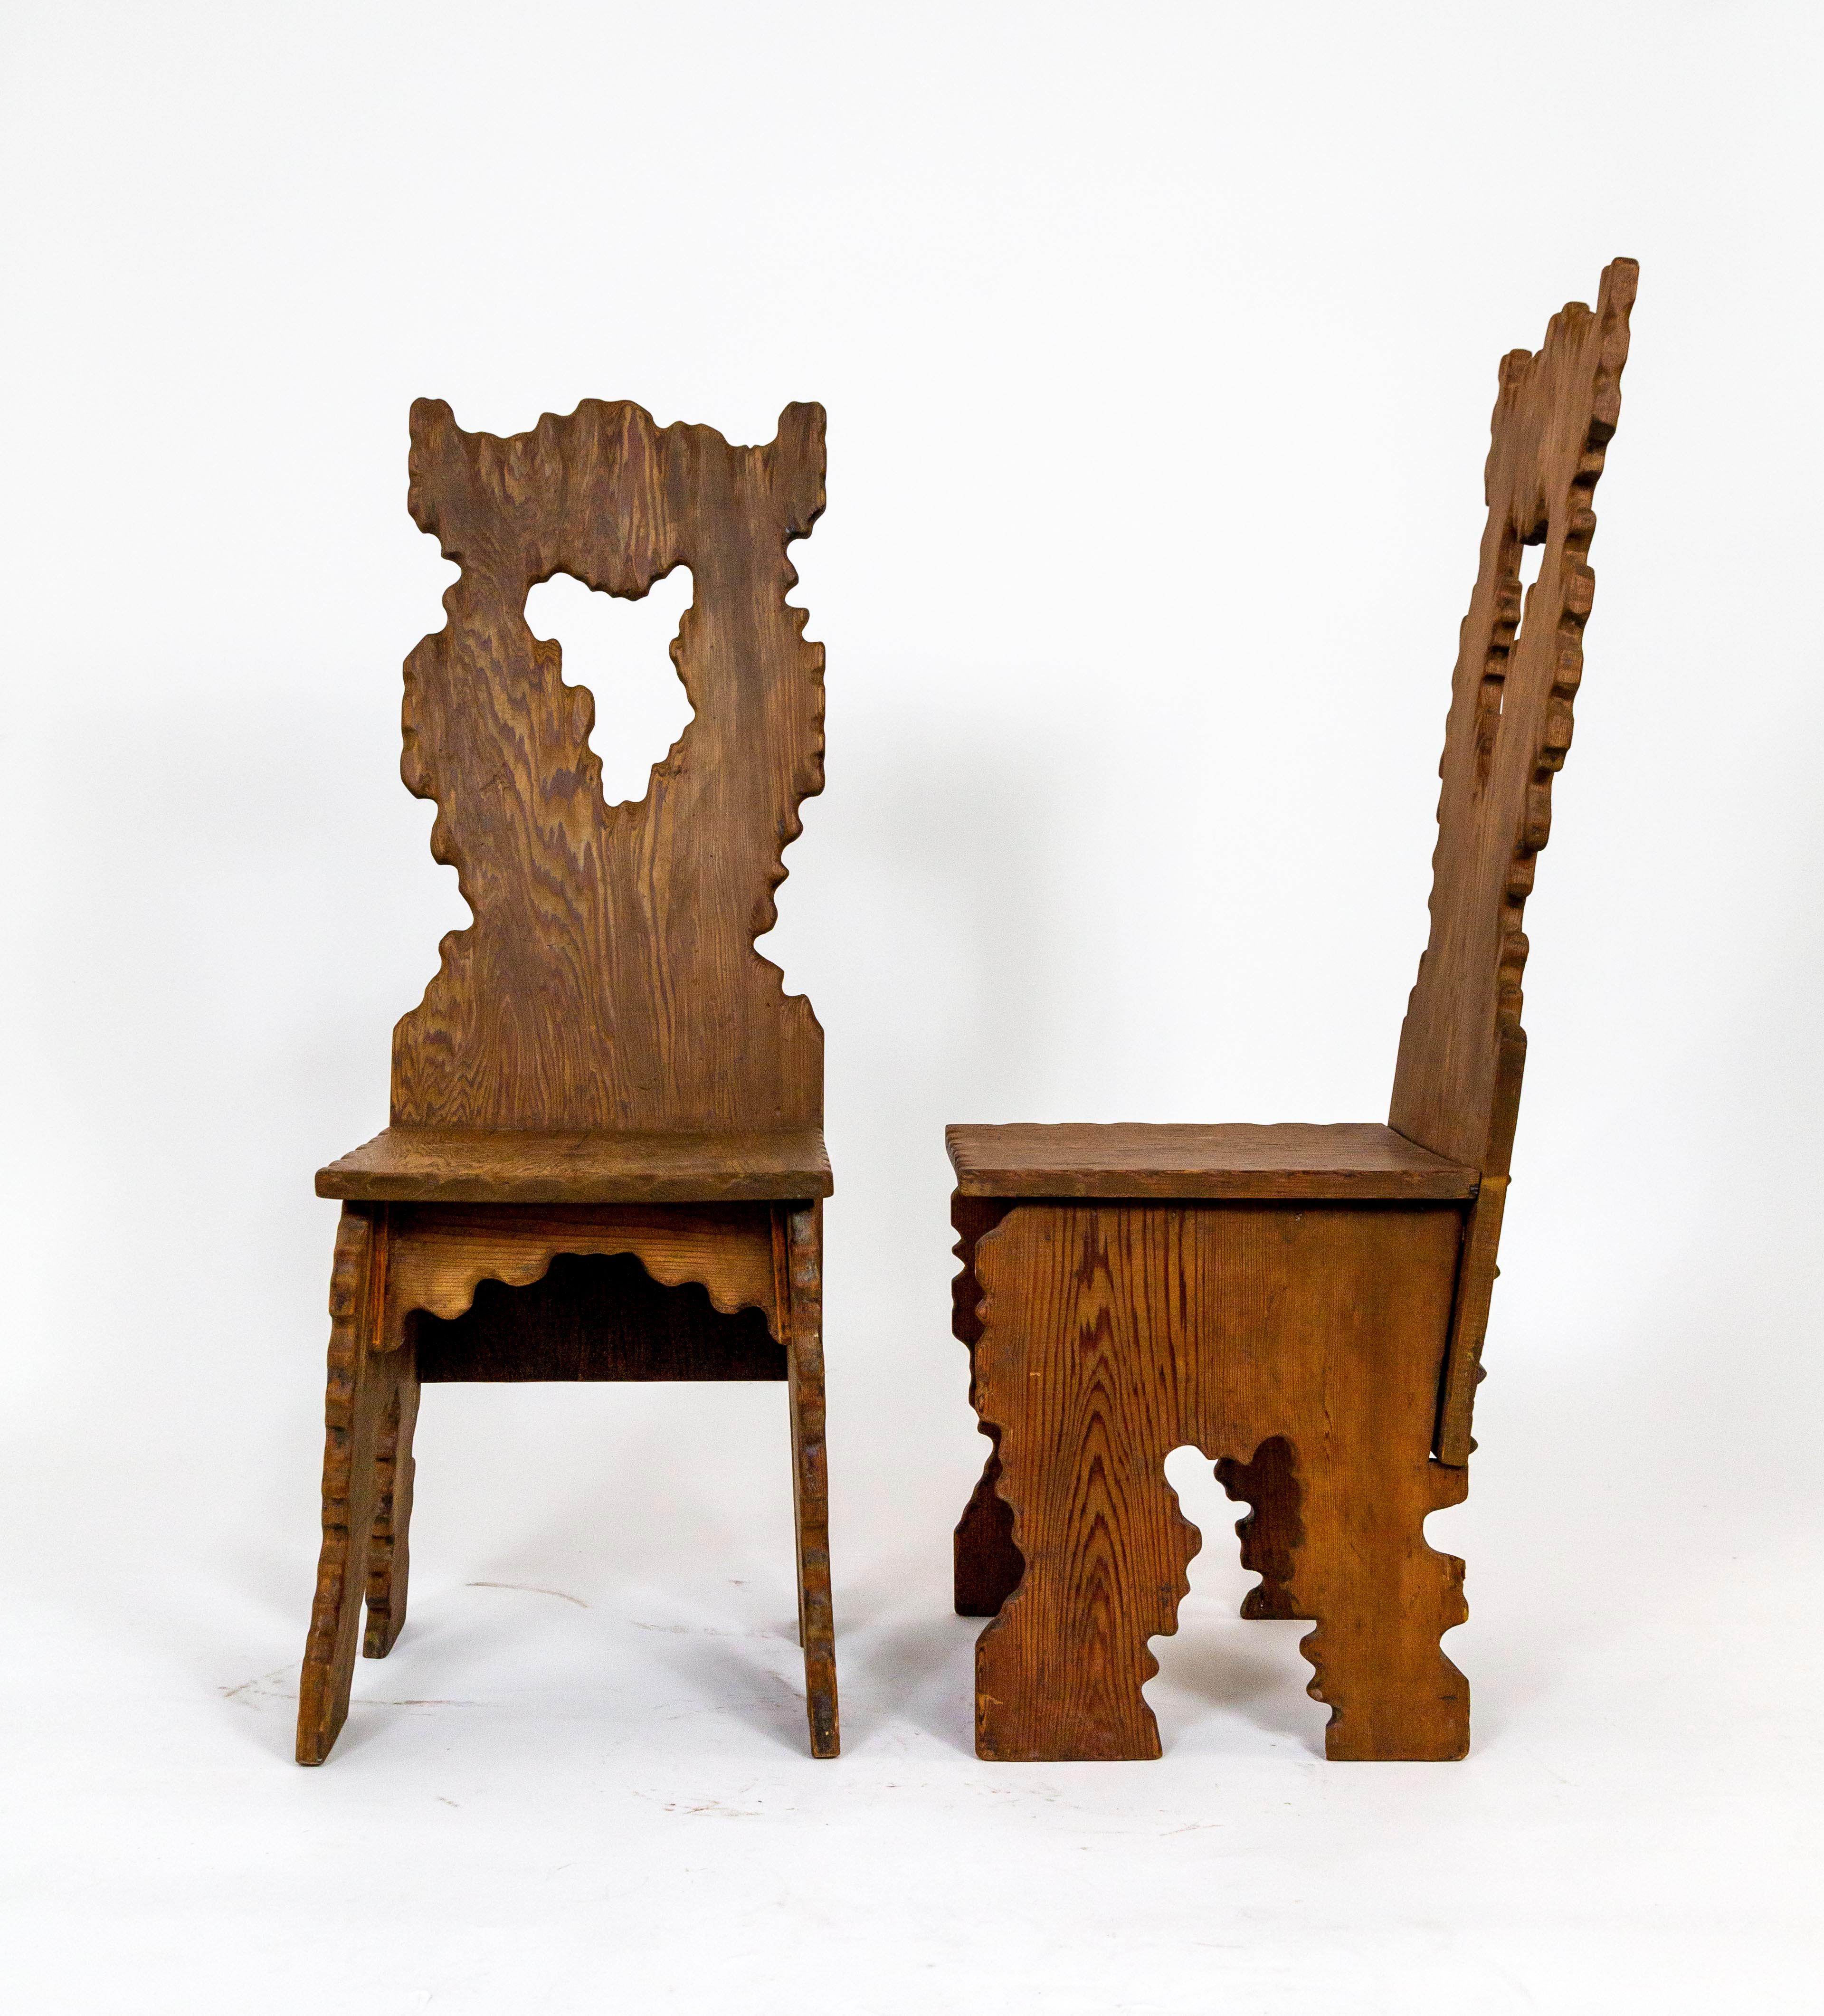 Organically shaped with a touch of whimsy this one of a kind pair of Fir chairs was handcrafted in 1912 in the Big Sur/Carmel region of Central California. The bottom of each chair is signed M. Wieland . Pyramid  shaped fastener covers finish the